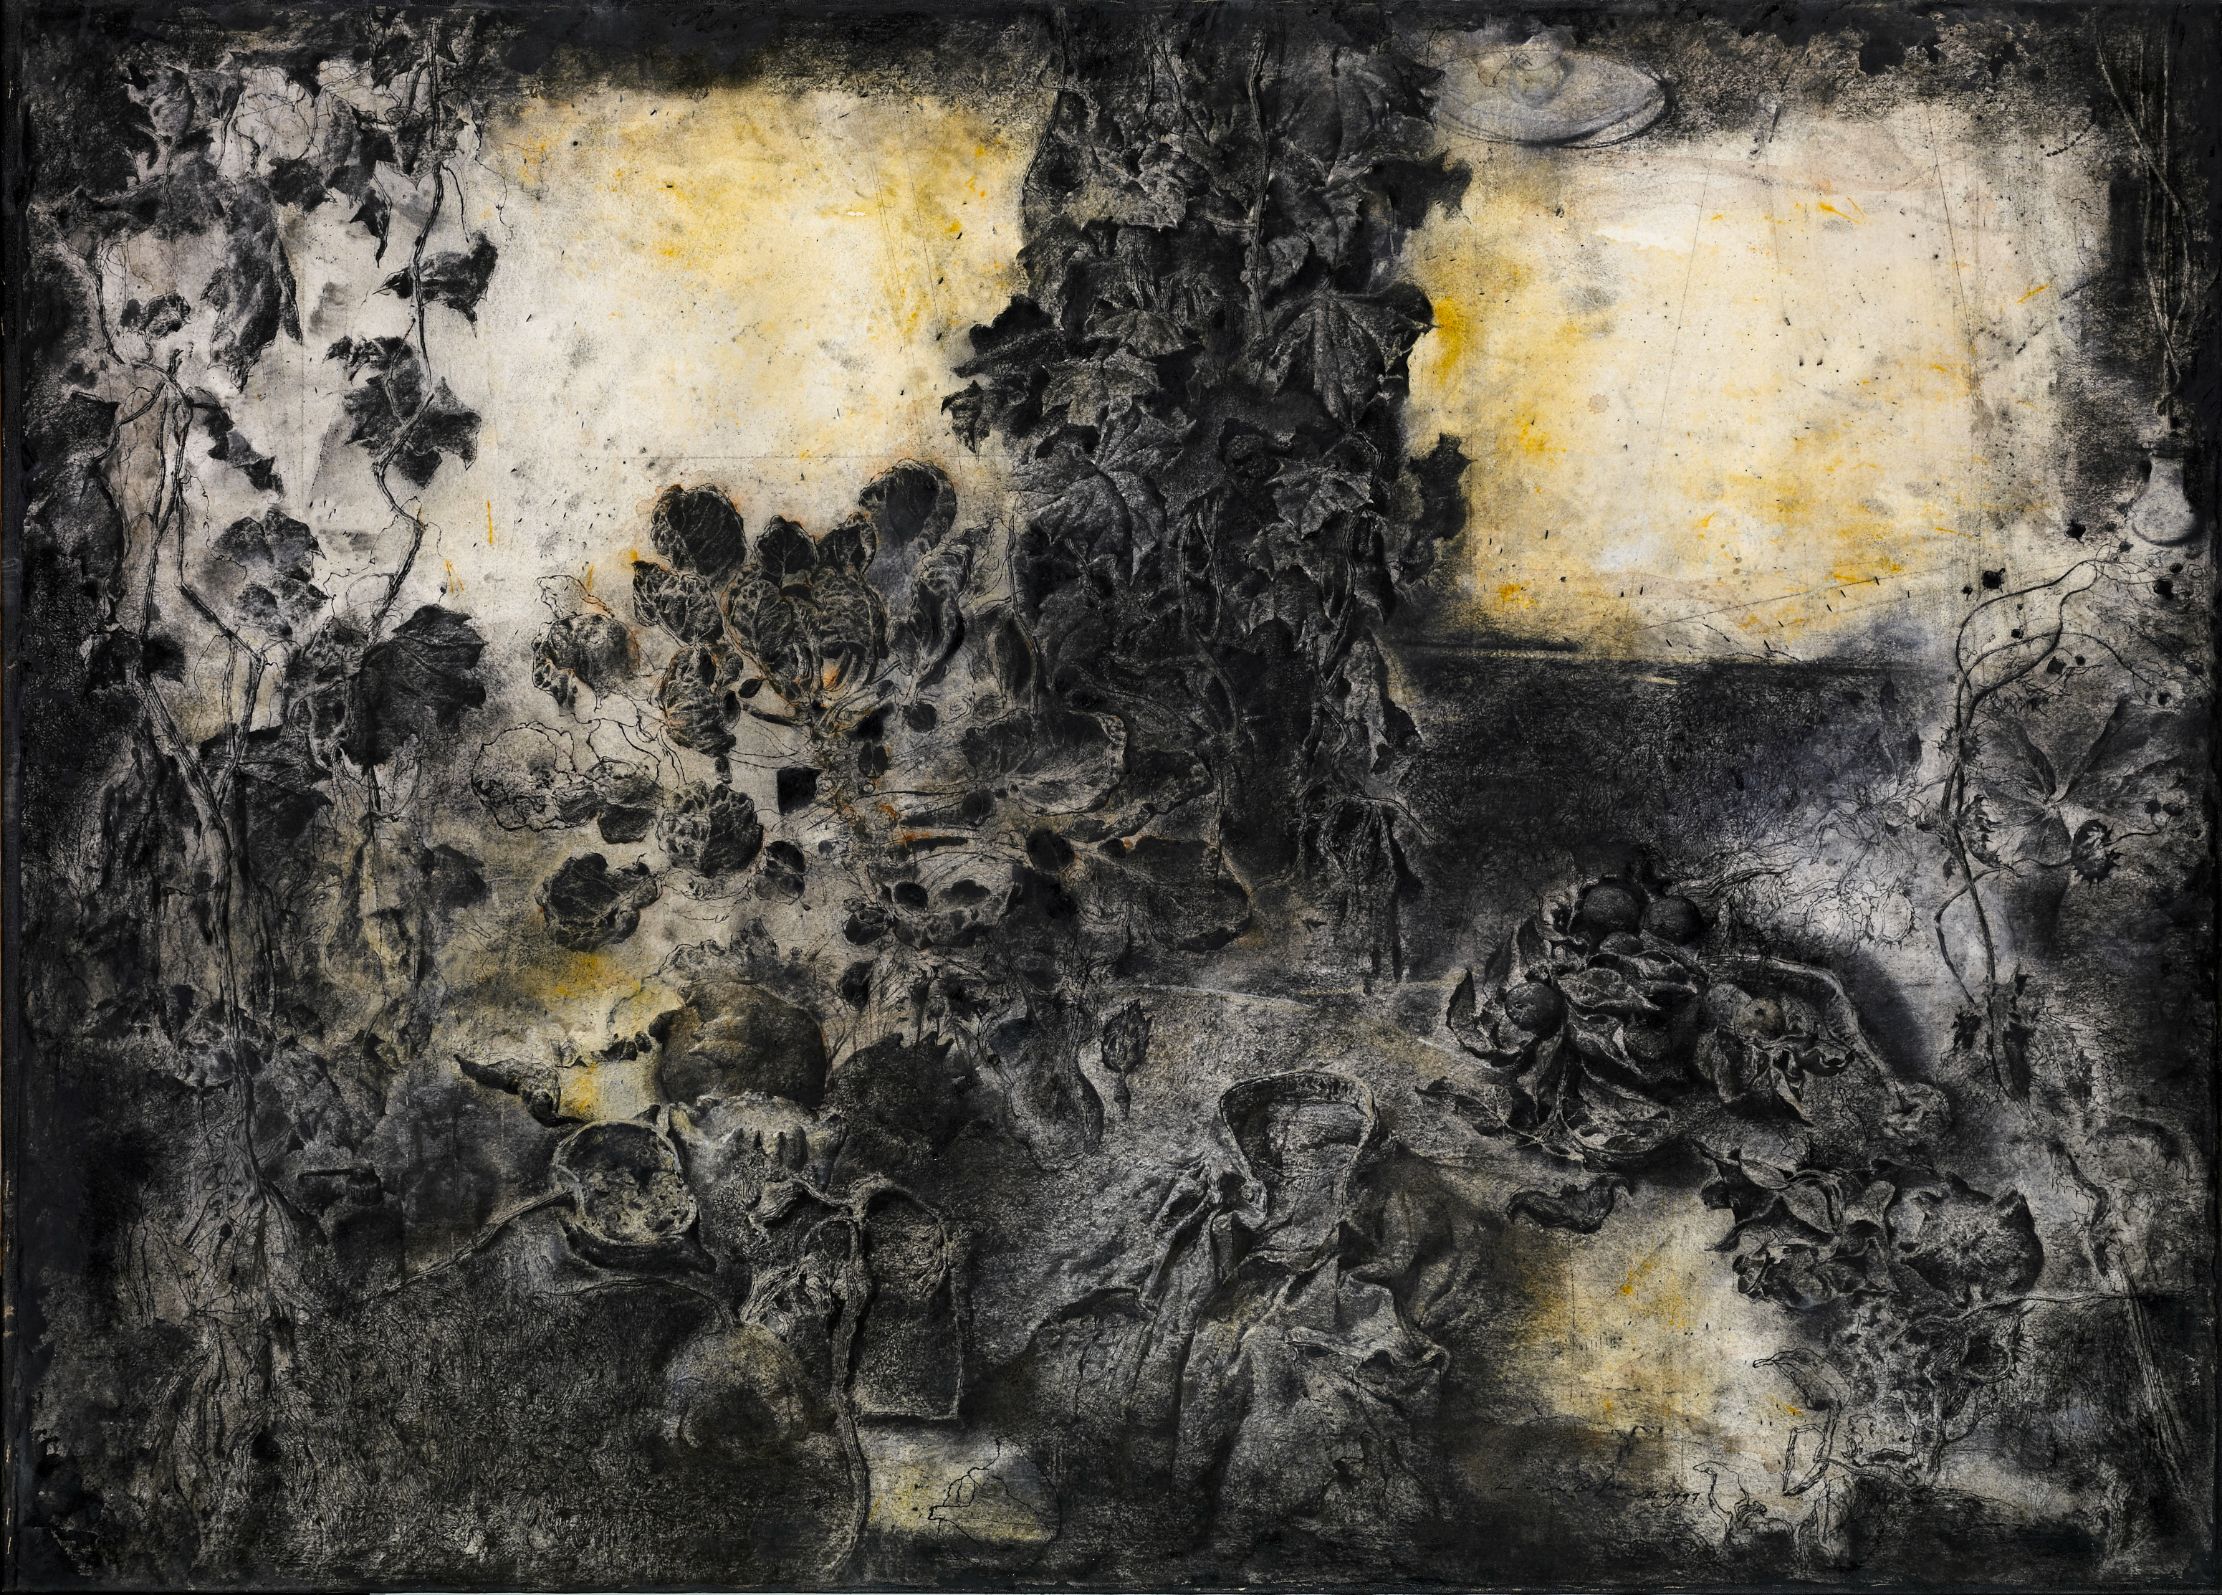 Liang Zhaoxi │ LC-67 │ Charcoal, pastel, watercolor on paper │ 116 x 162 cm｜1997｜Collection of Yu-Hsiu Museum of Art